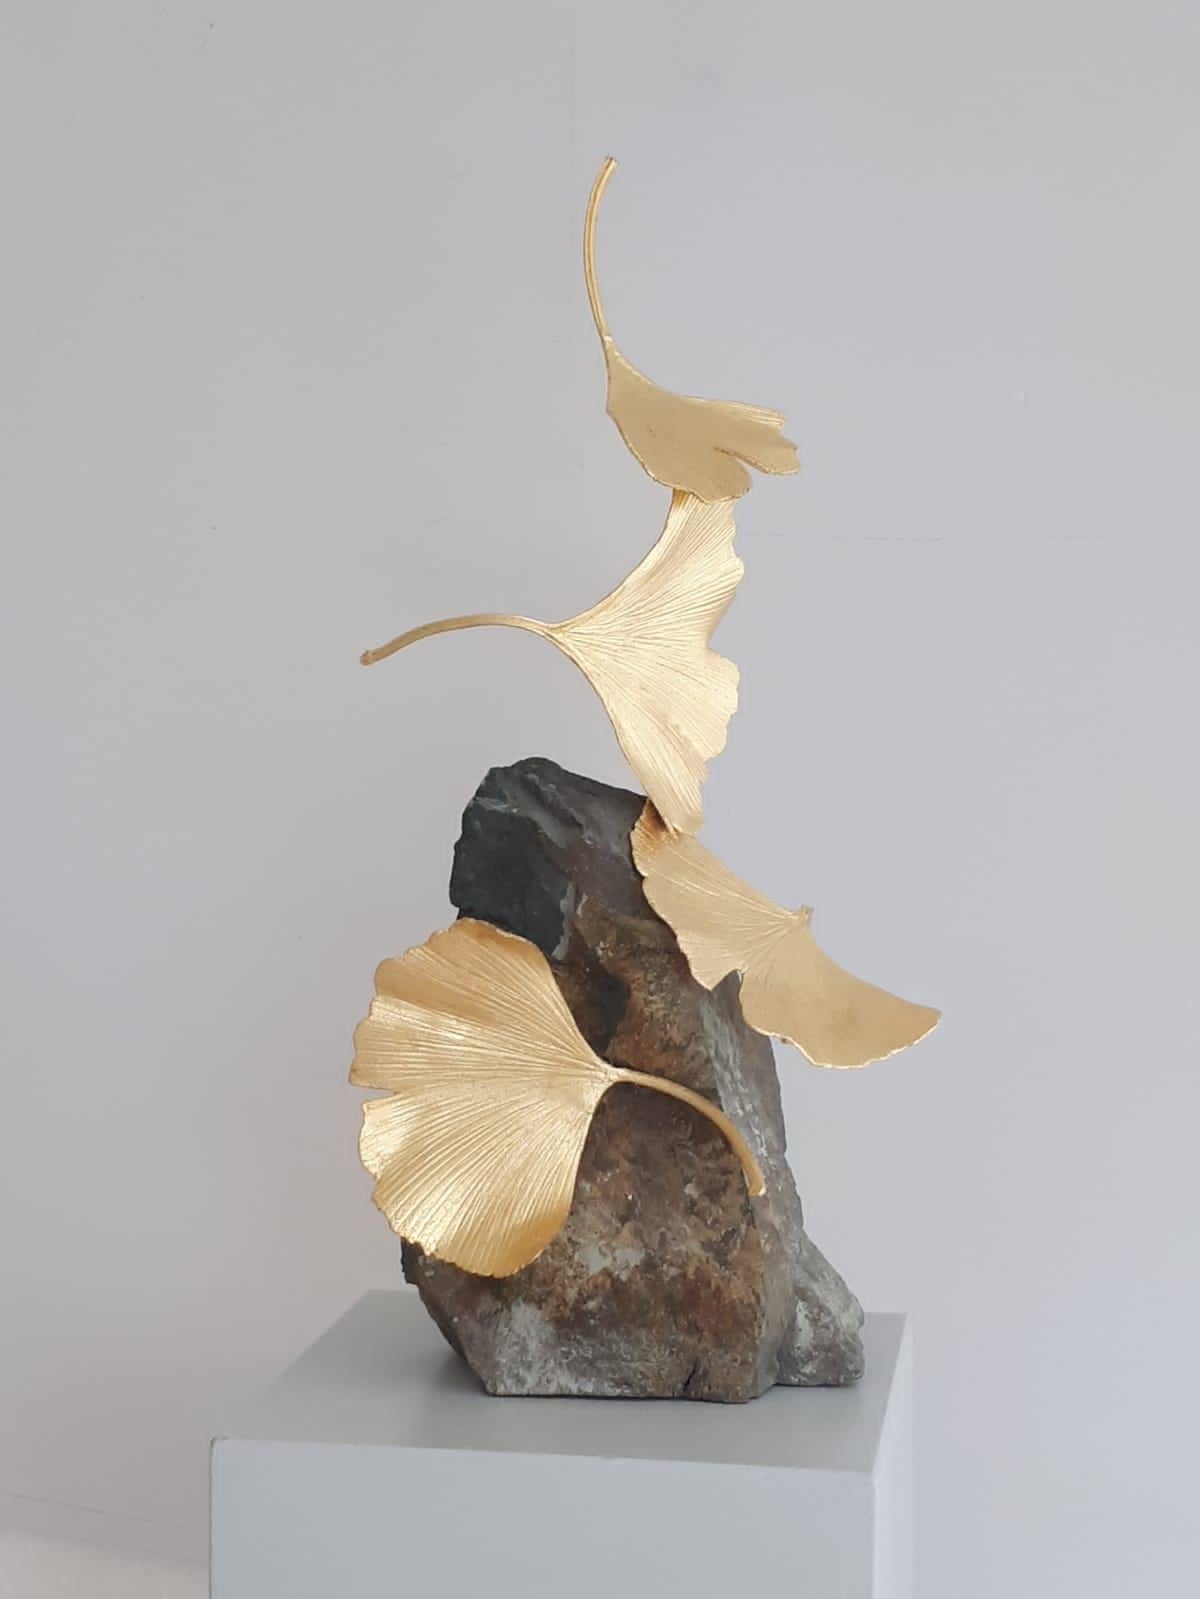 Artist: Kuno Vollet
Title: 4 Leaf Stone Gingko 
Materials: Cast brass, gold leaf, Stone base

This small elegant original brass cast and gold leaf sculpture by German artist Kuno Vollet brings nature and energy into any art collection.
Each leaf is